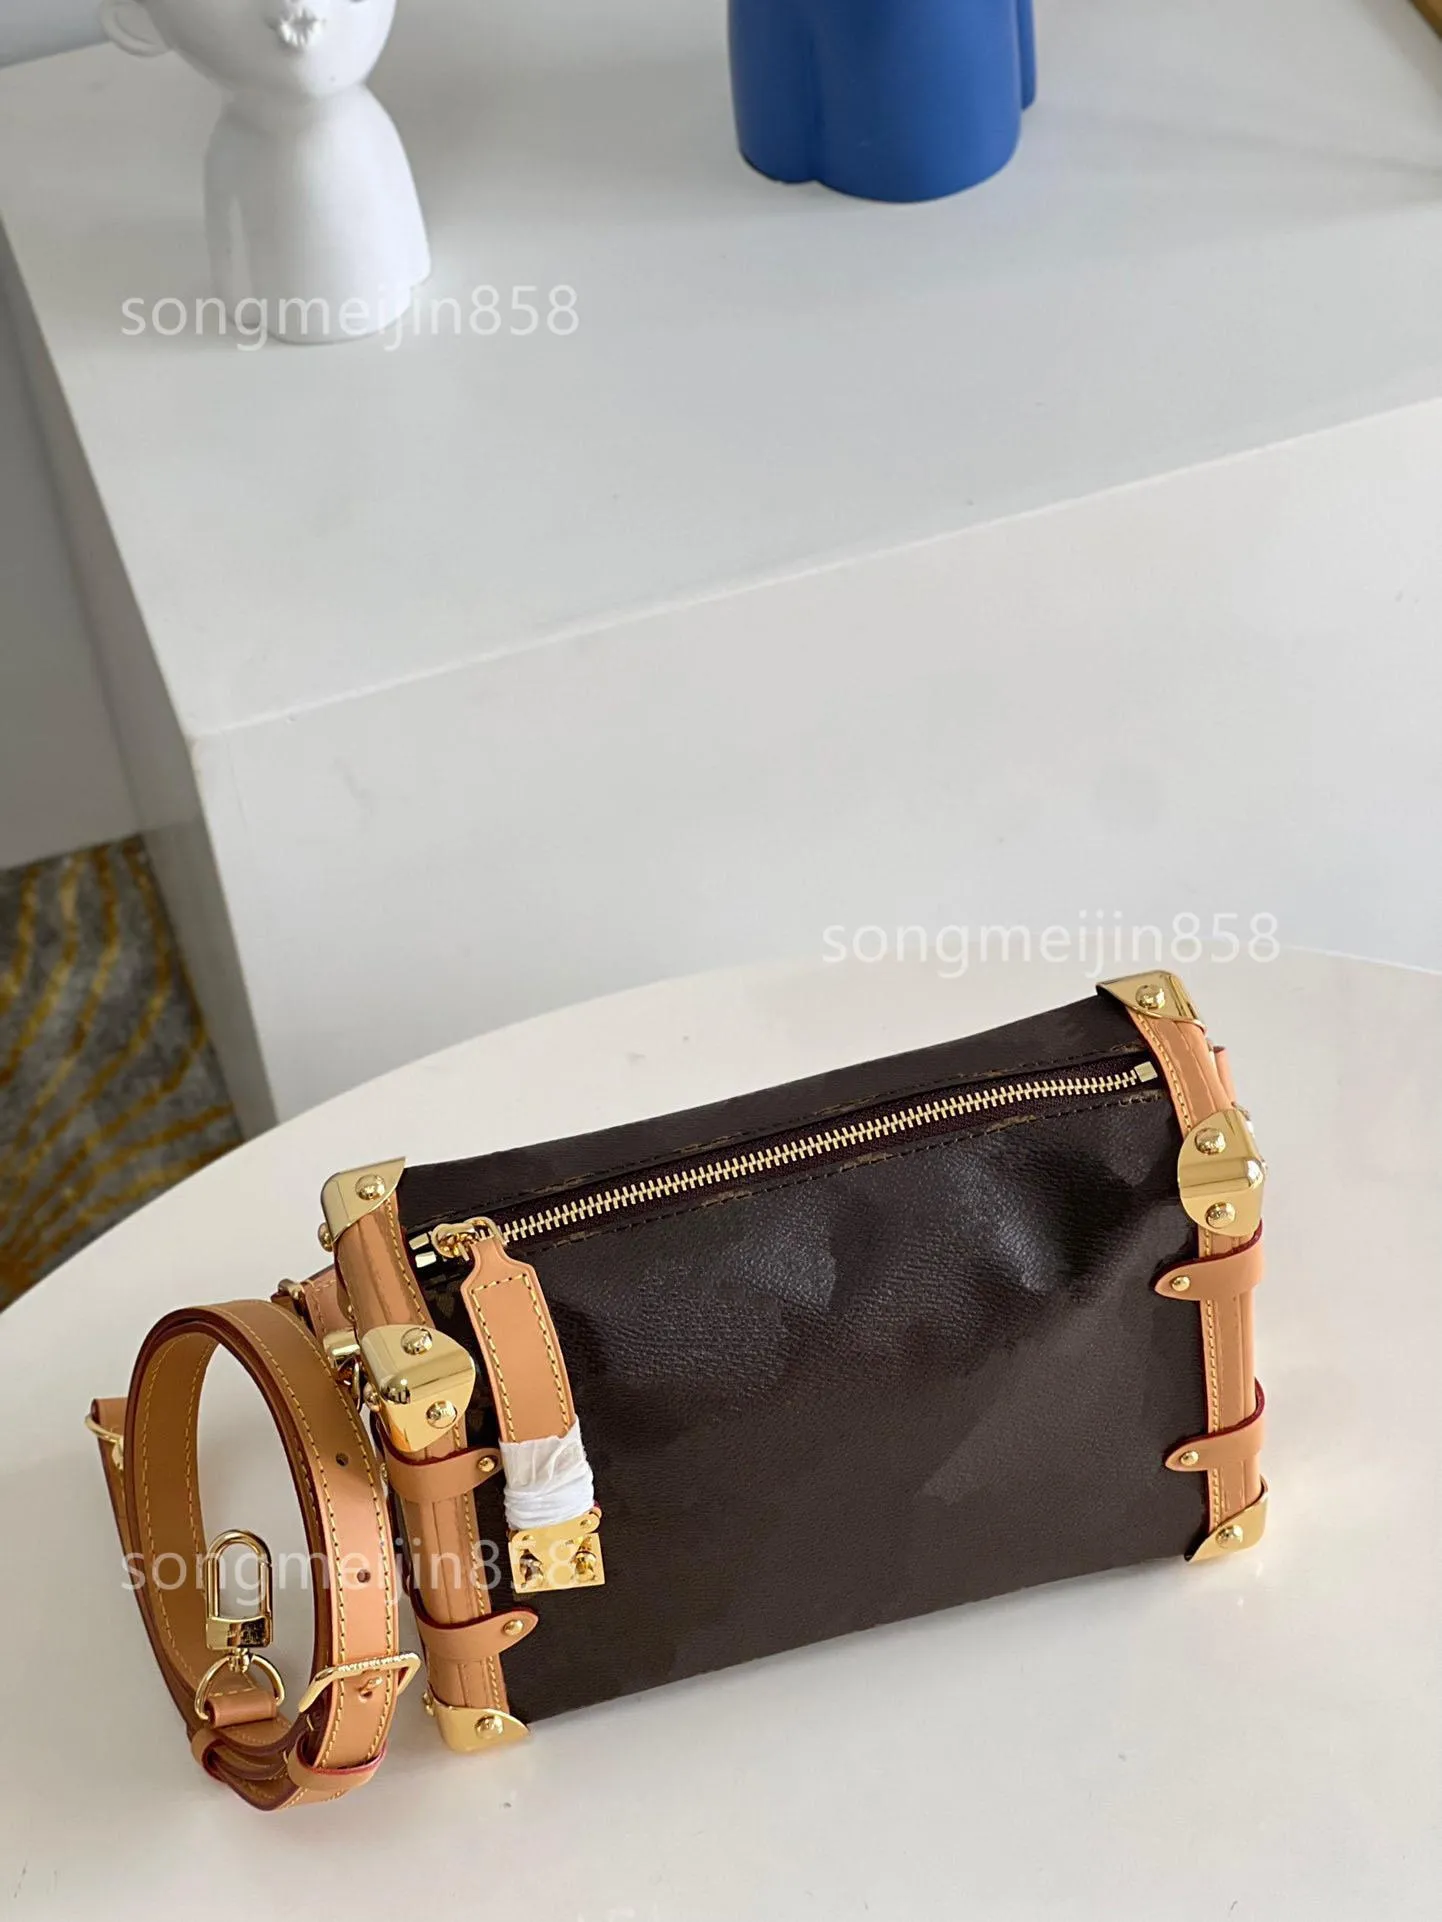 2022 New arrive designer bag side trunk pm old flower box for women M46358 leather crossbody package tote messenger bags240z